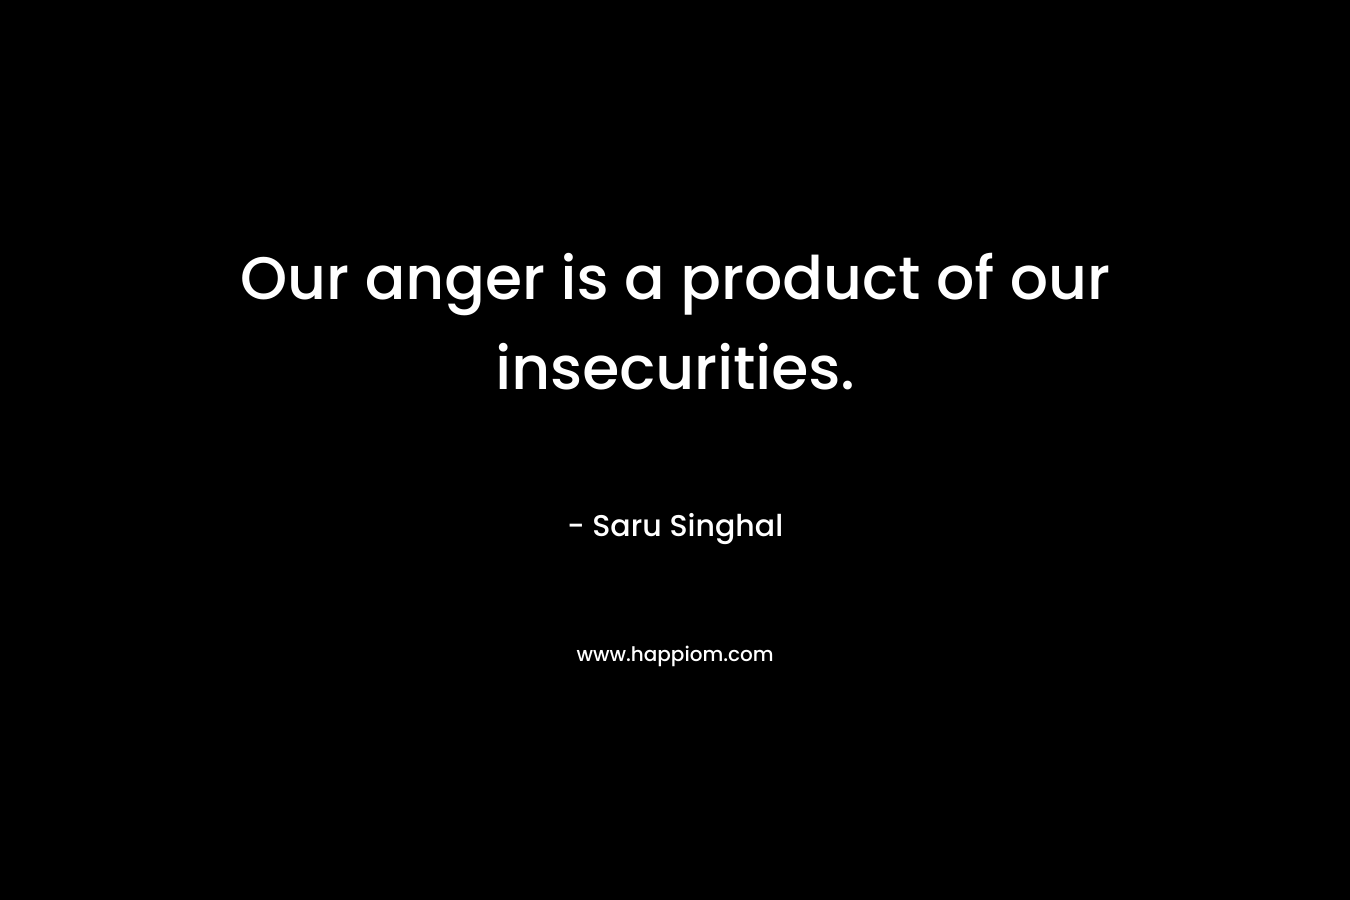 Our anger is a product of our insecurities.